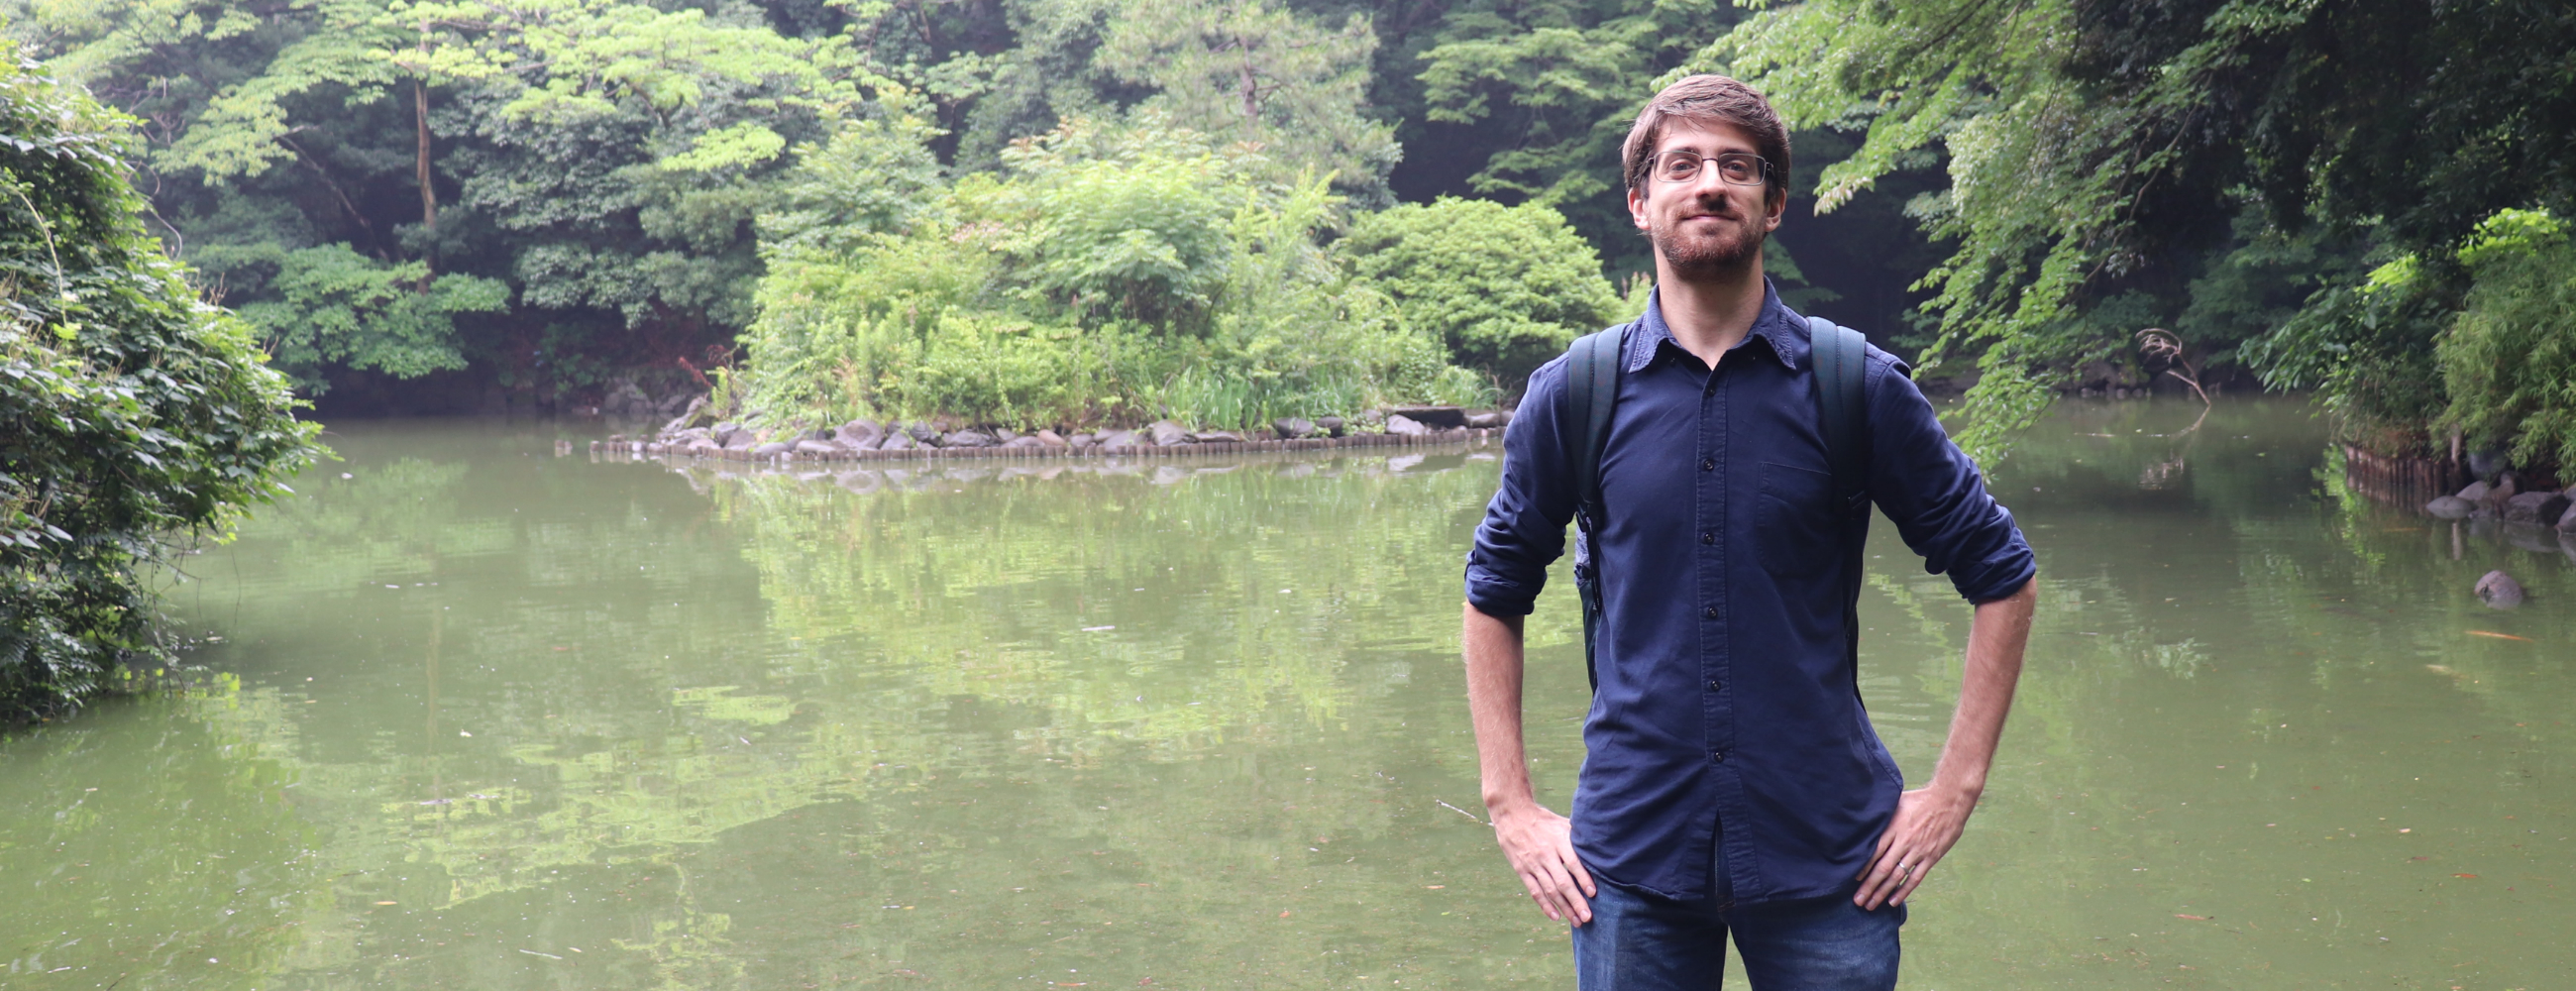 Student standing in a green area in front of a pond